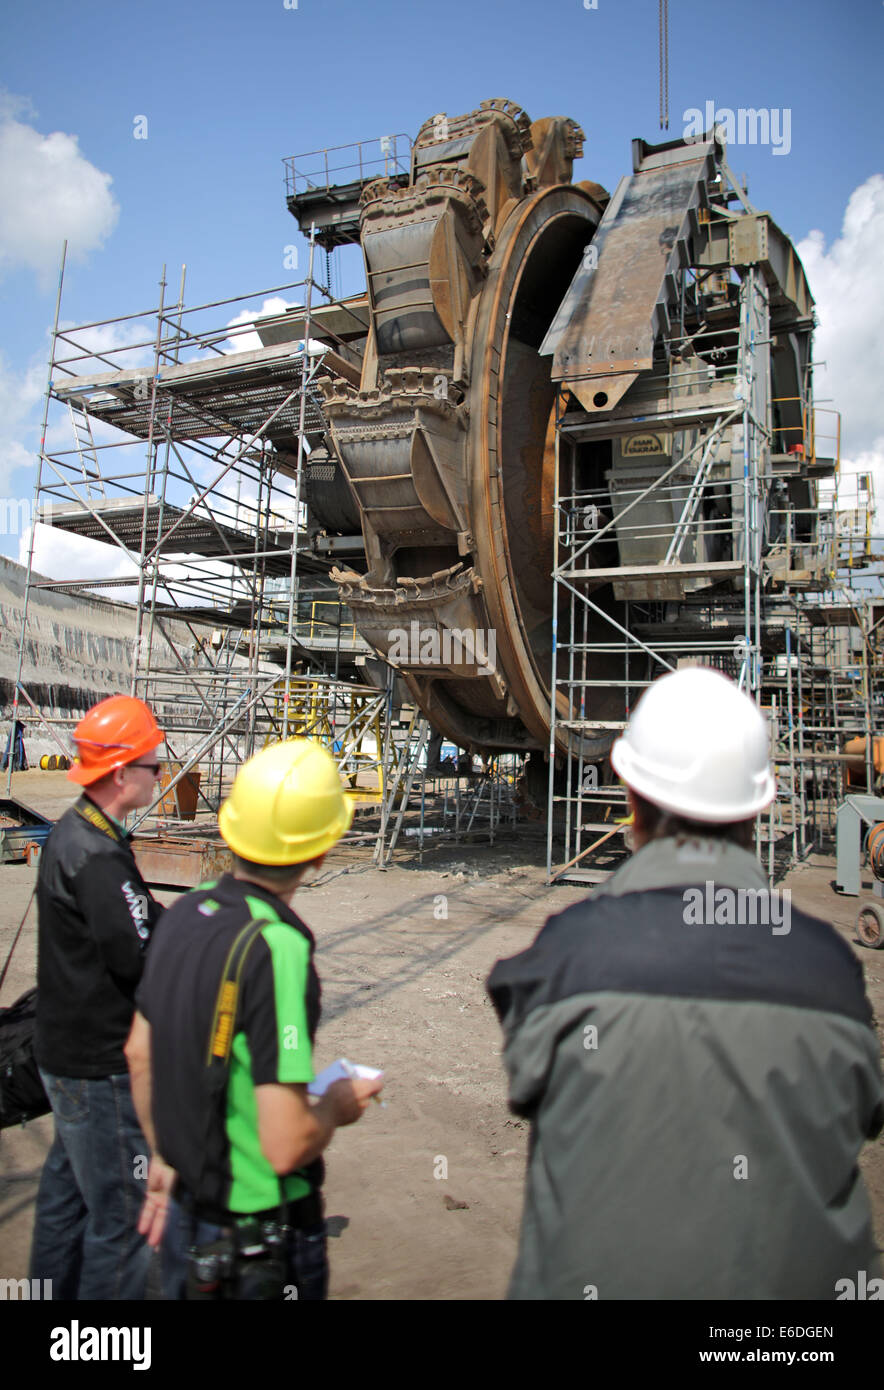 Poedelwitz, Germany. 21st Aug, 2014. Journalists stand in front of a bucket-wheel excavator during a general overhaul at the surface mine Vereintes Schleenhain near Poedelwitz, Germany, 21 August 2014. Brown coal company Mibrag will conduct a complex overhaul of a bucket-wheel excavator and of a stacker from July 2014 till October 2014. Photo: JAN WOITAS/DPA/Alamy Live News Stock Photo